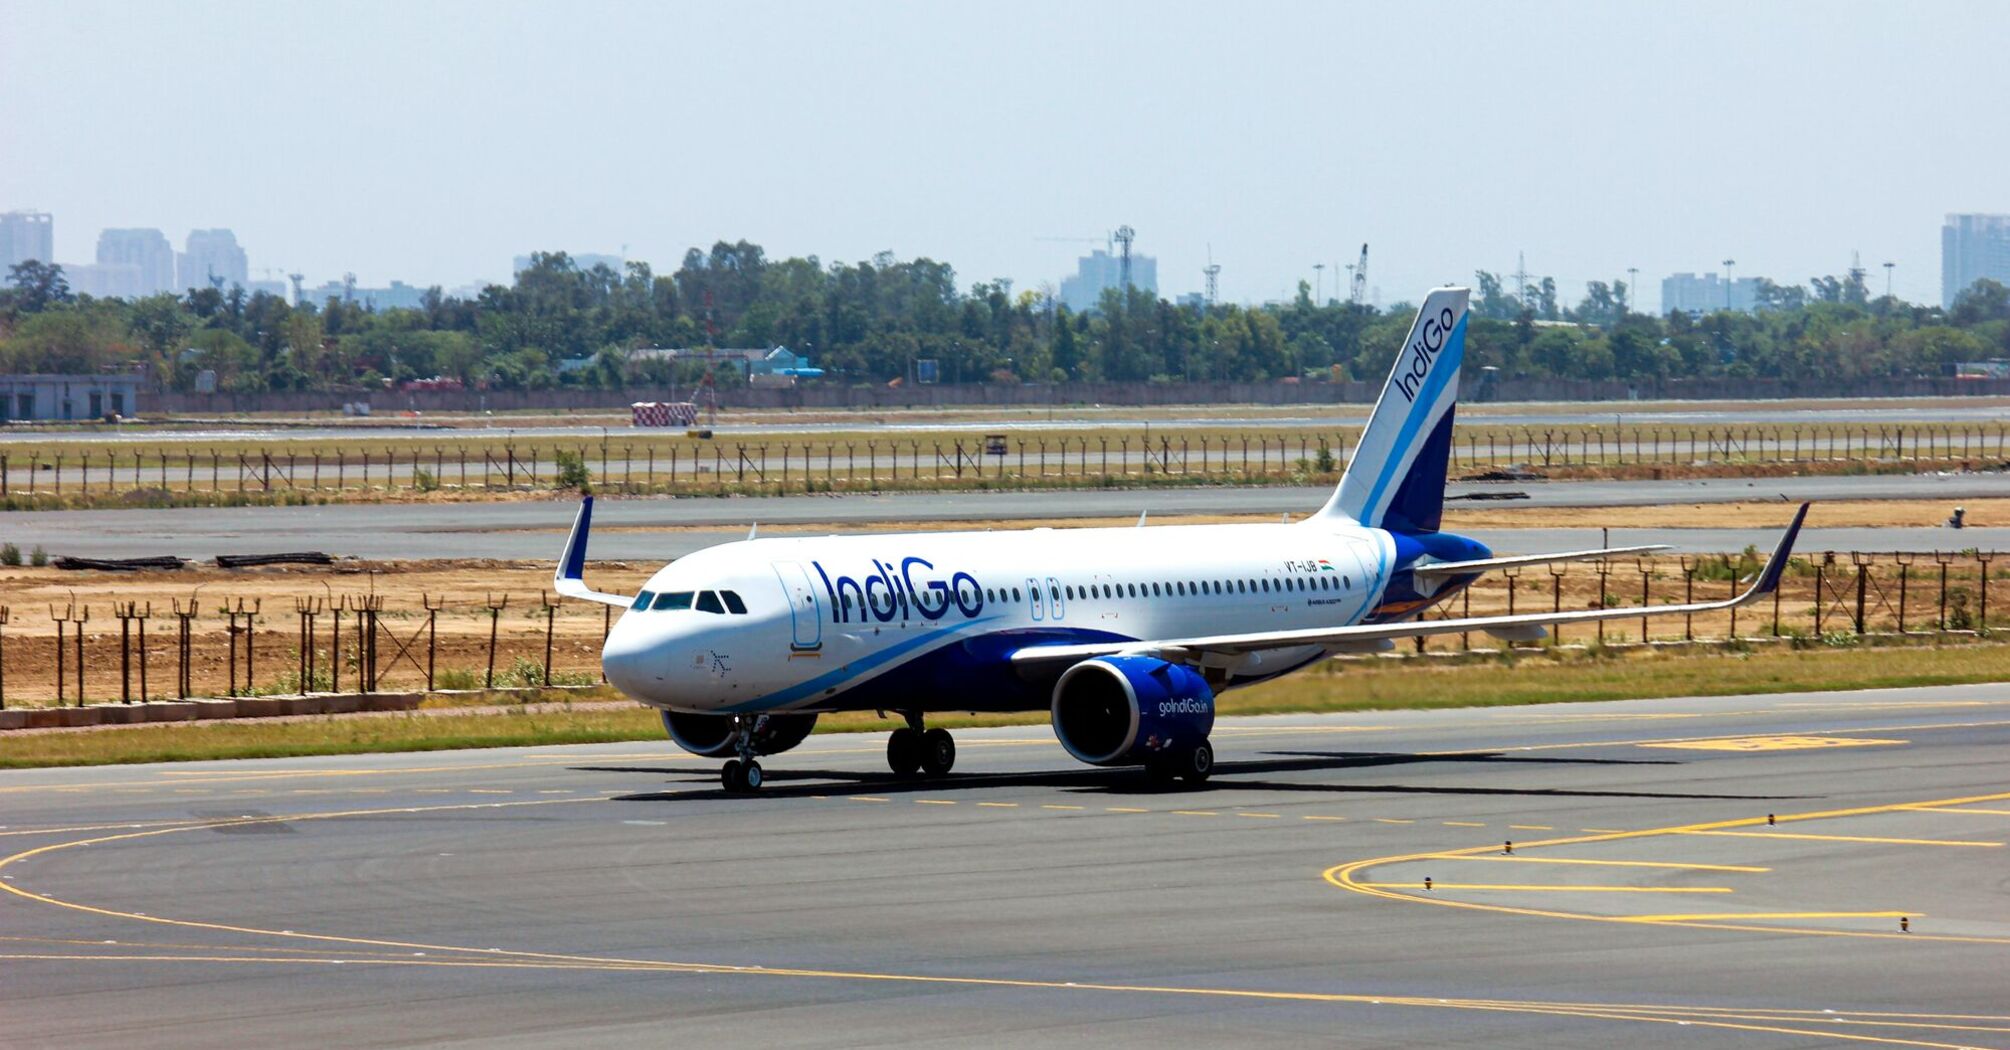 Indigo airlines plane on the runway